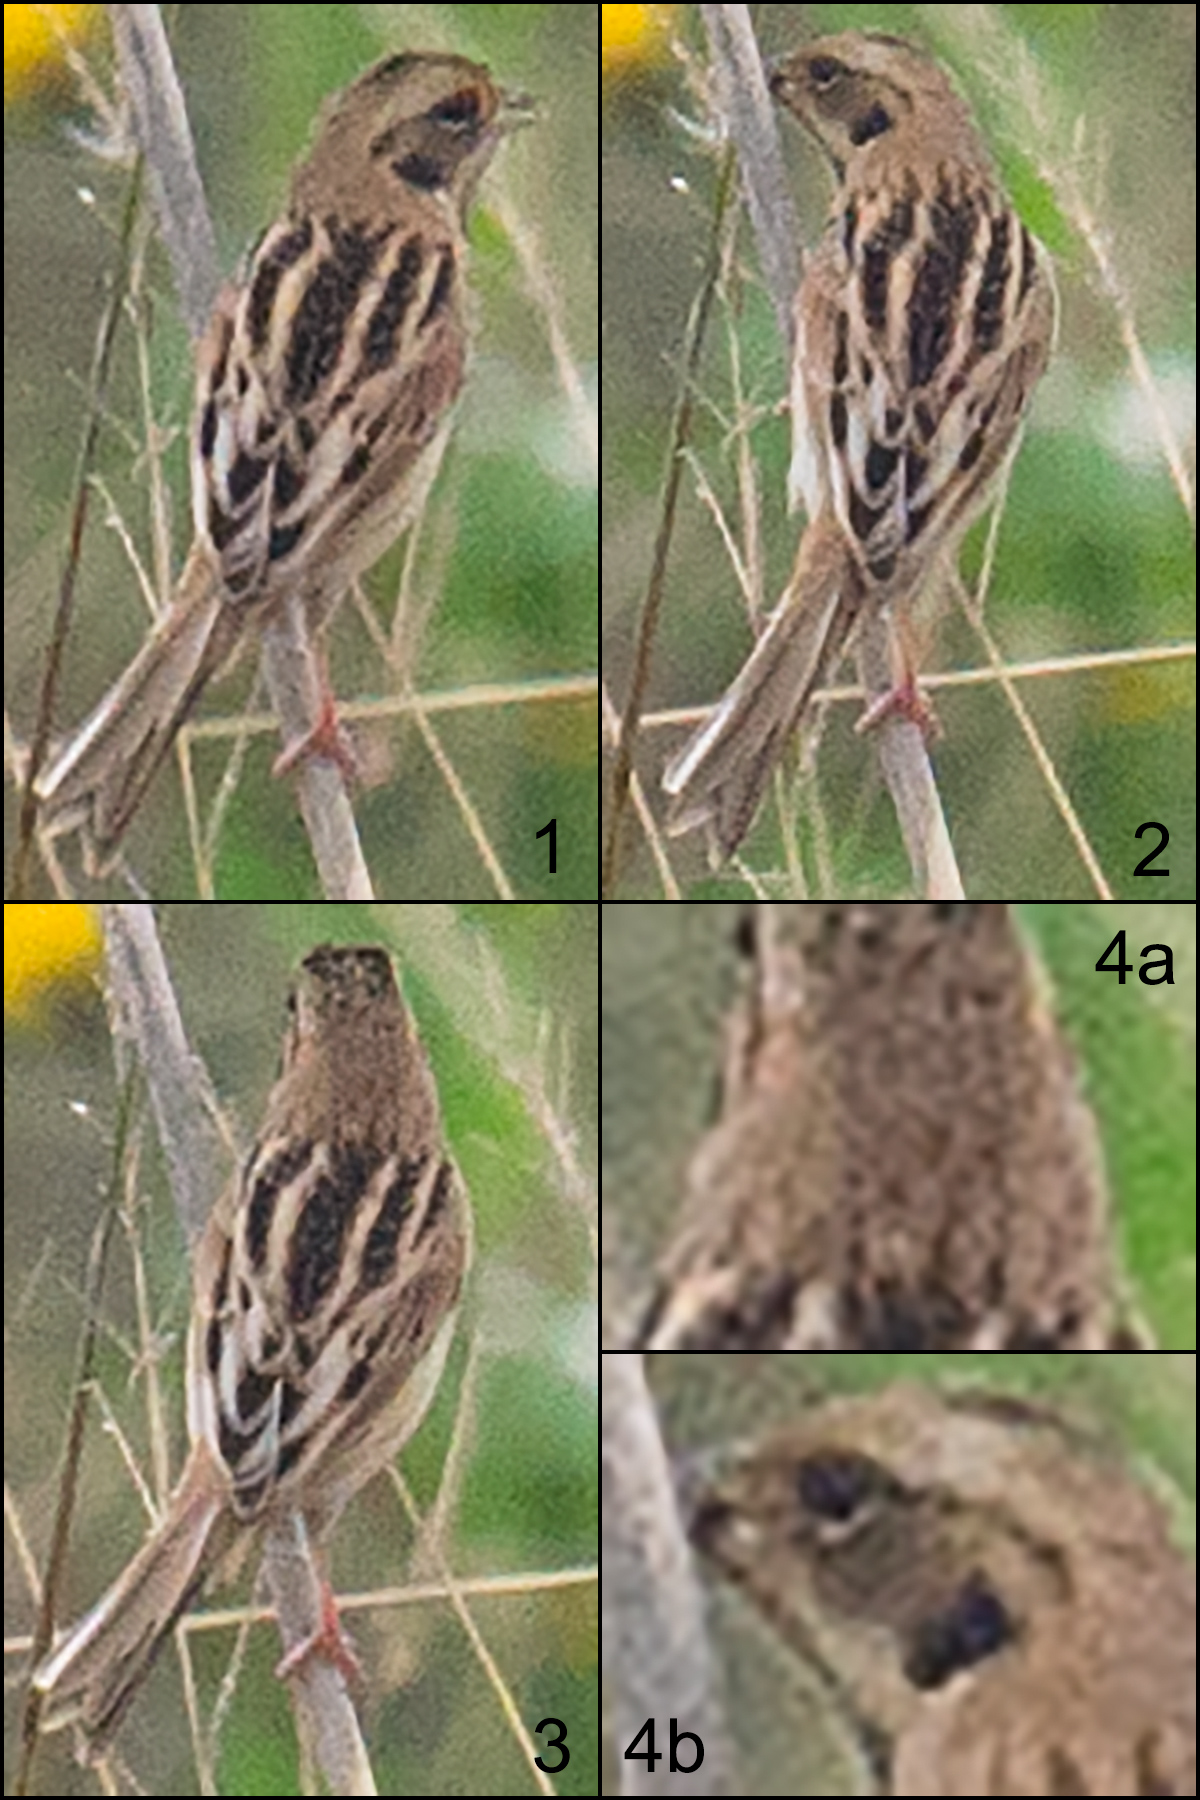 Japanese Reed Bunting Emberiza yessoensis. The IUCN lists it as Near Threatened because of the loss of wetland habitat in its breeding range (which includes Heilongjiang) as well as in its wintering grounds. The continued degradation of the Nanhui coastal marshes is a prime example of the general problems this species faces.